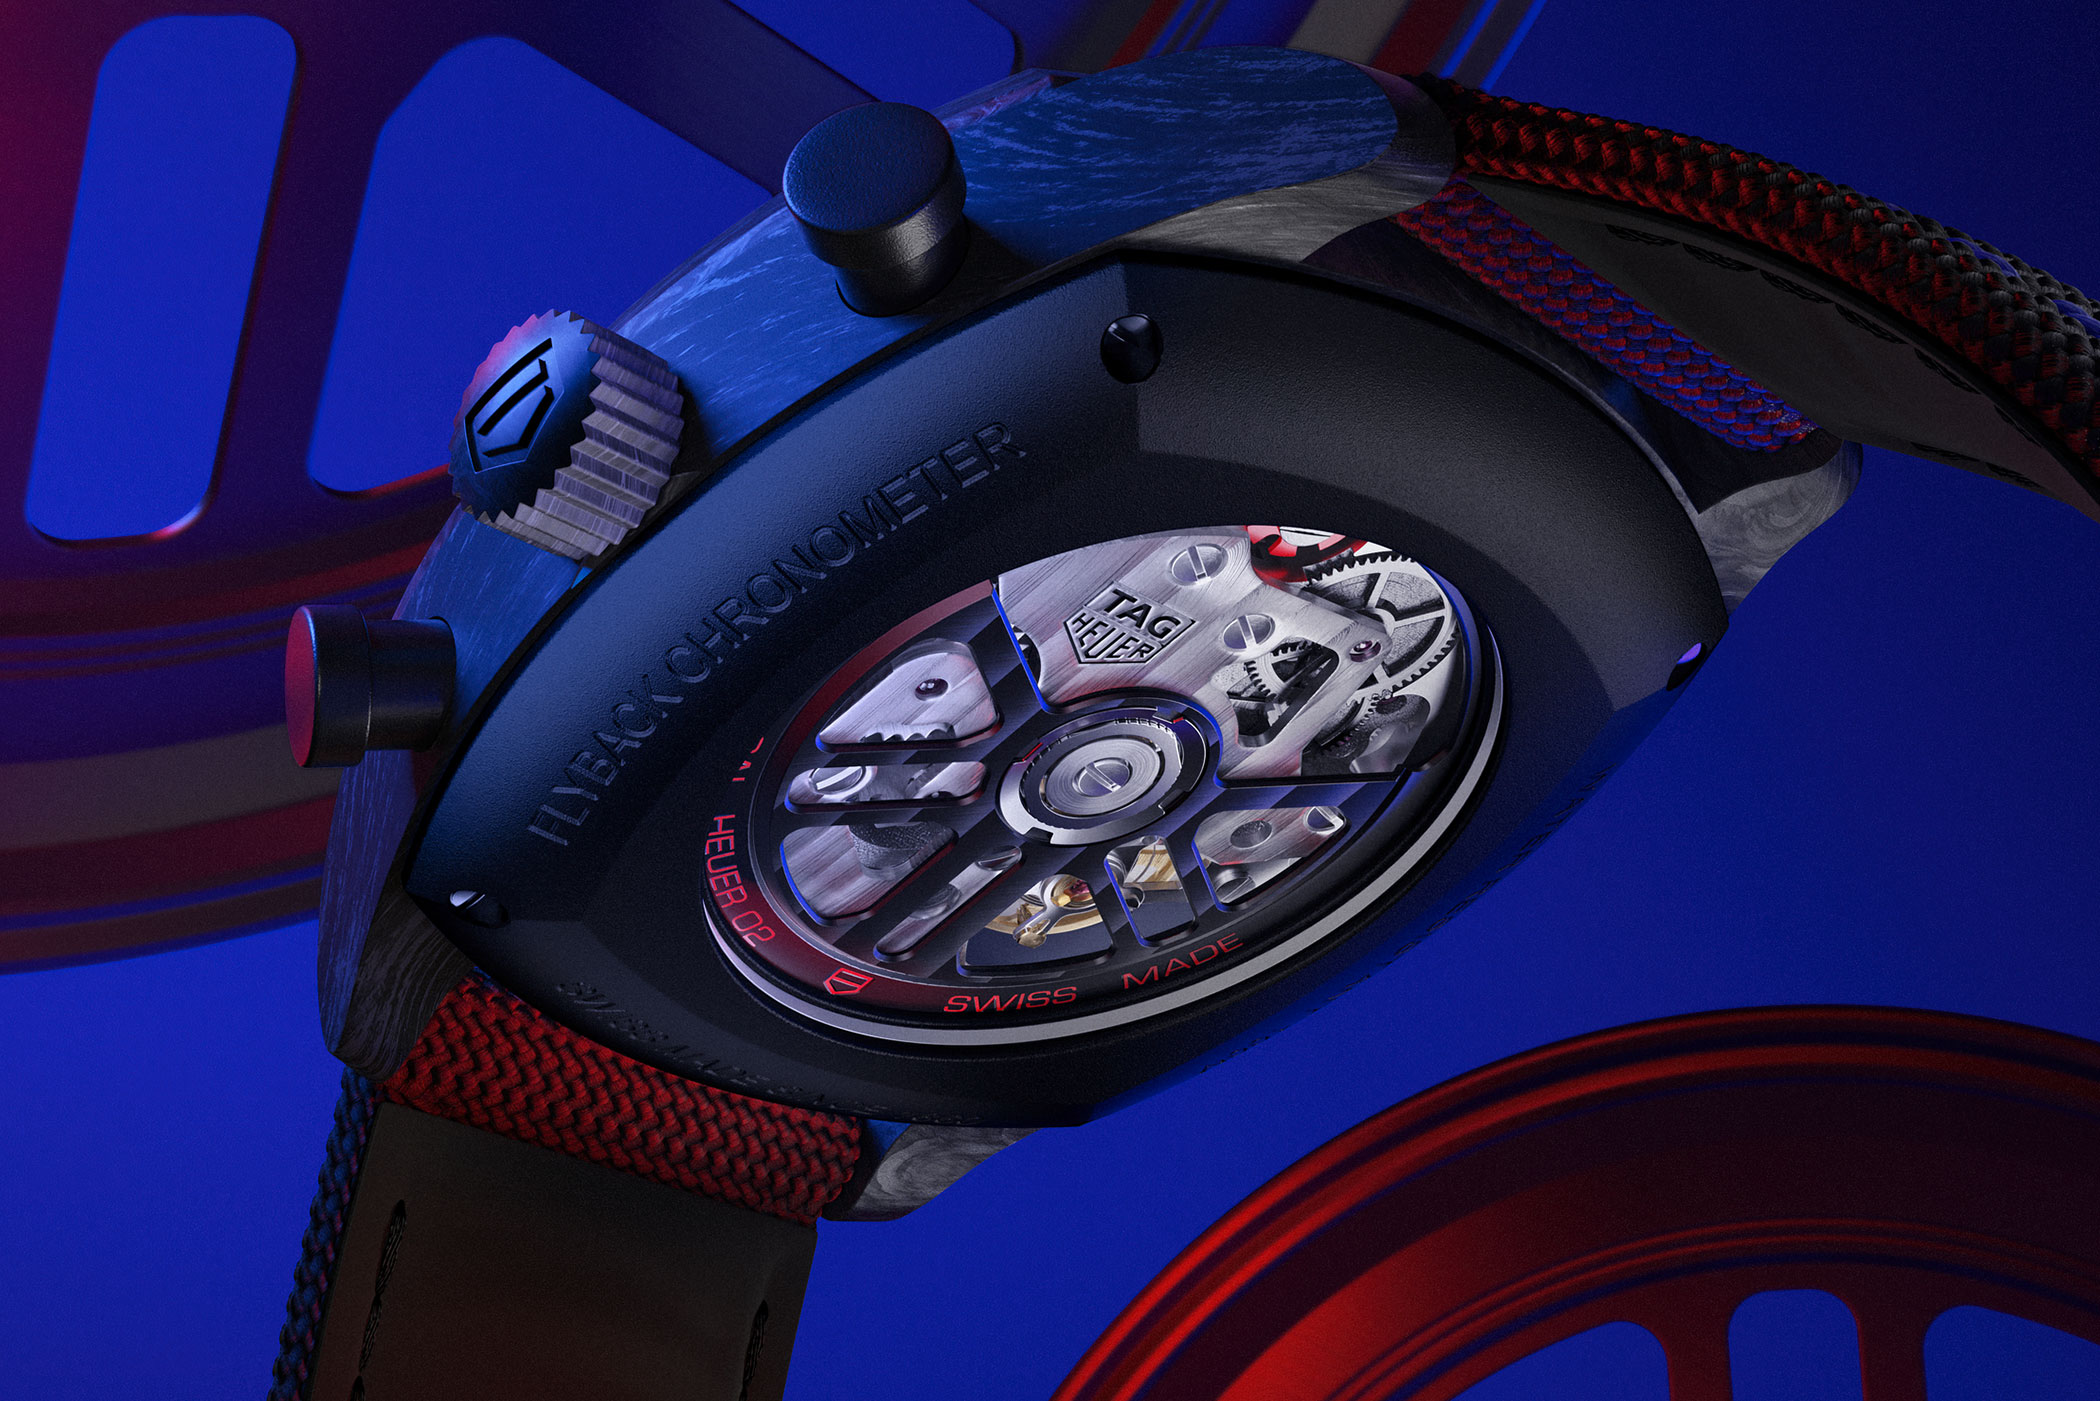 TAG Heuer, watches, chronographs - Watches & Jewelry – LVMH